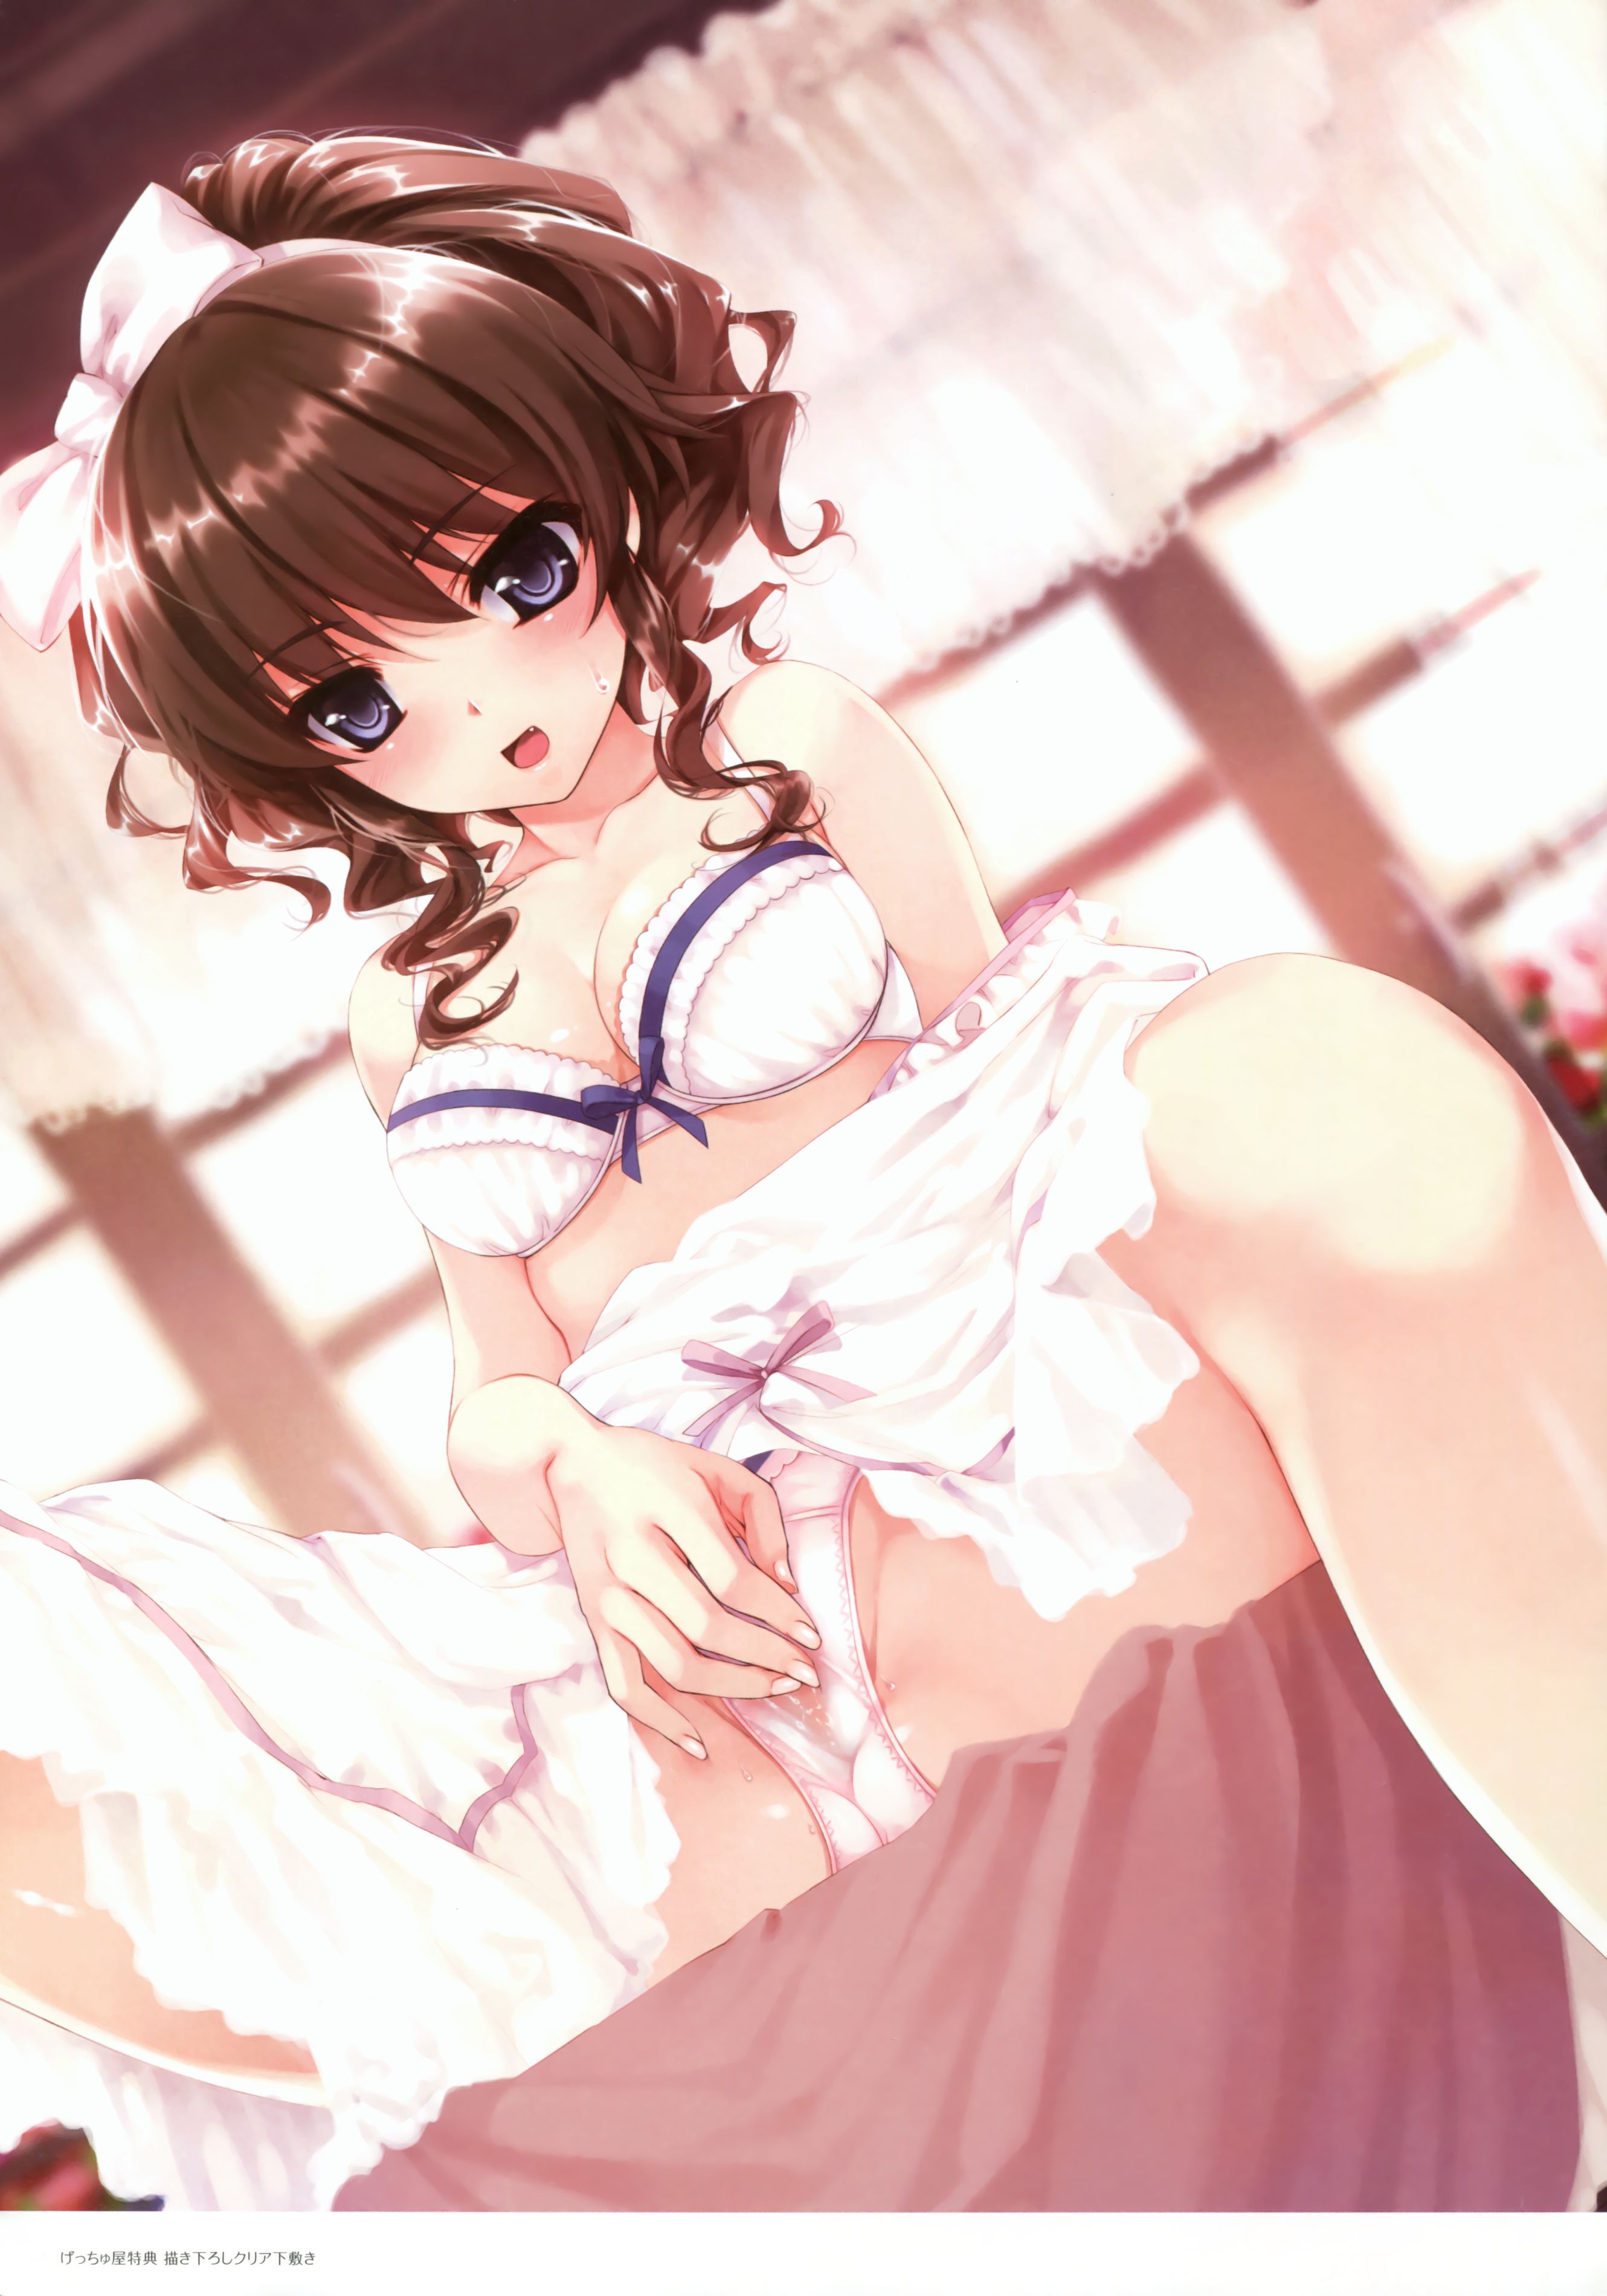 Erotic anime summary Erotic image collection of beautiful girls who are too pleasant to stop masturbation [50 sheets] 9